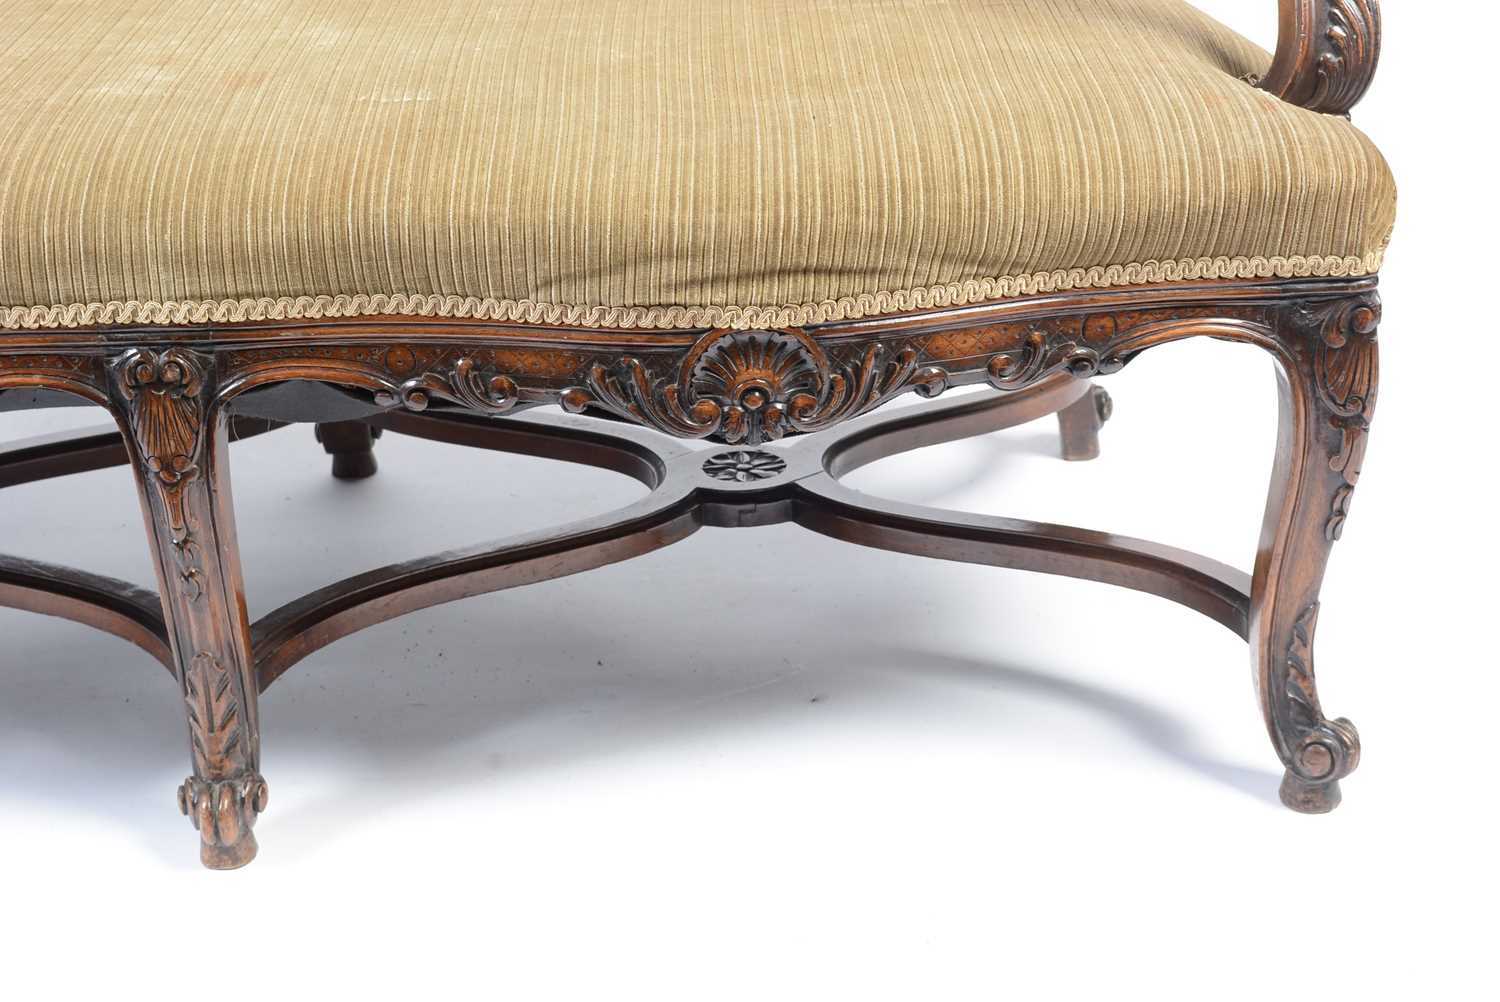 An attractive 18th Century style carved walnut high back settee, late 19th/early 20th Century - Image 5 of 15